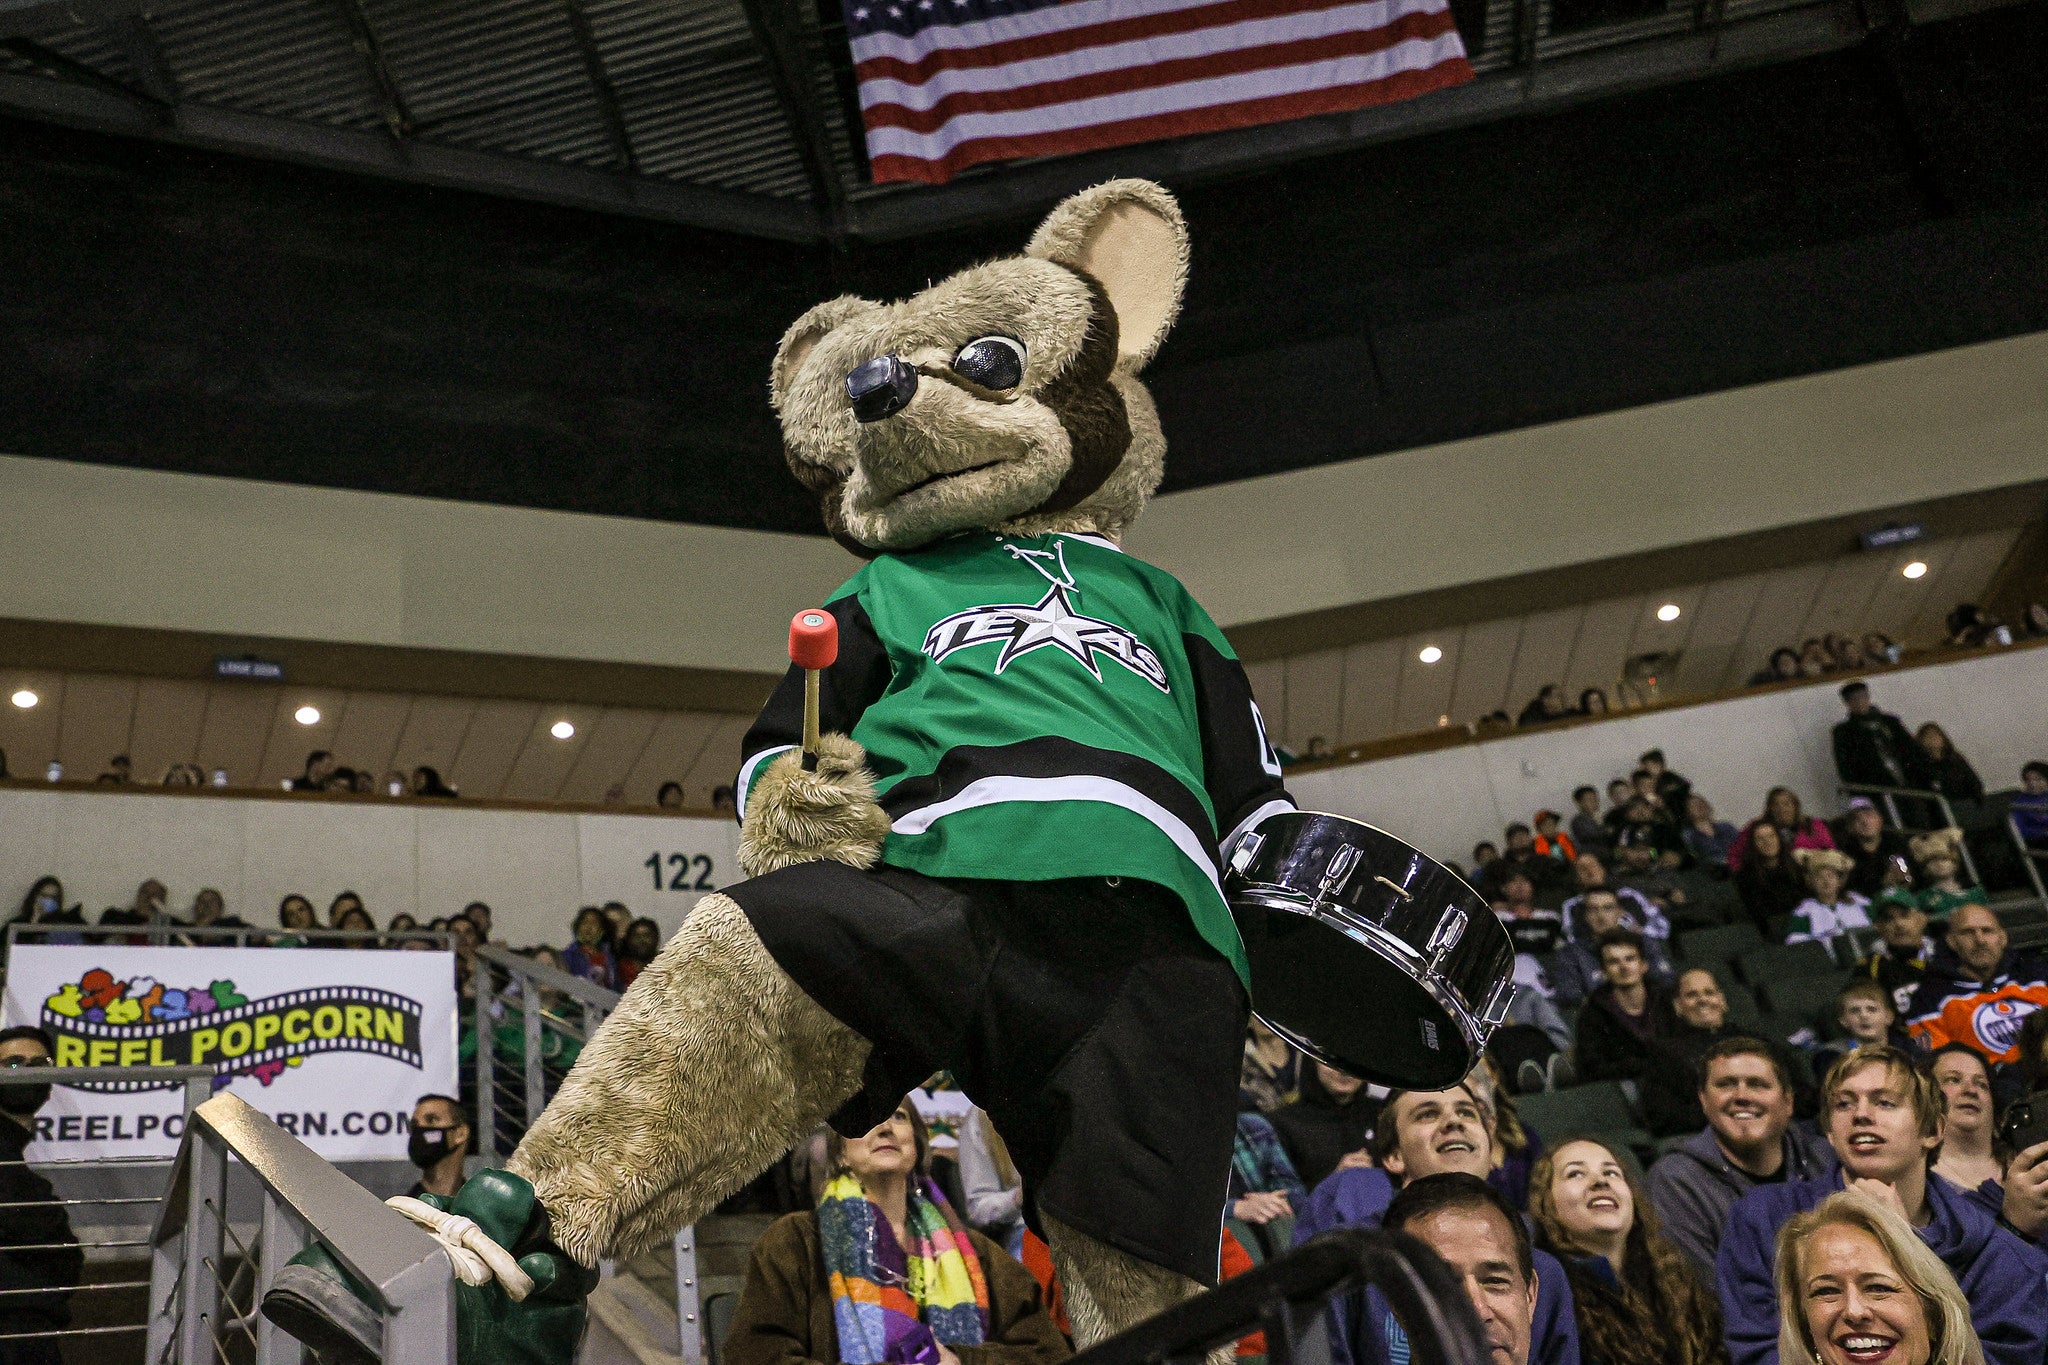 In Other News: Catching up with Ringo, the Texas Stars' mascot